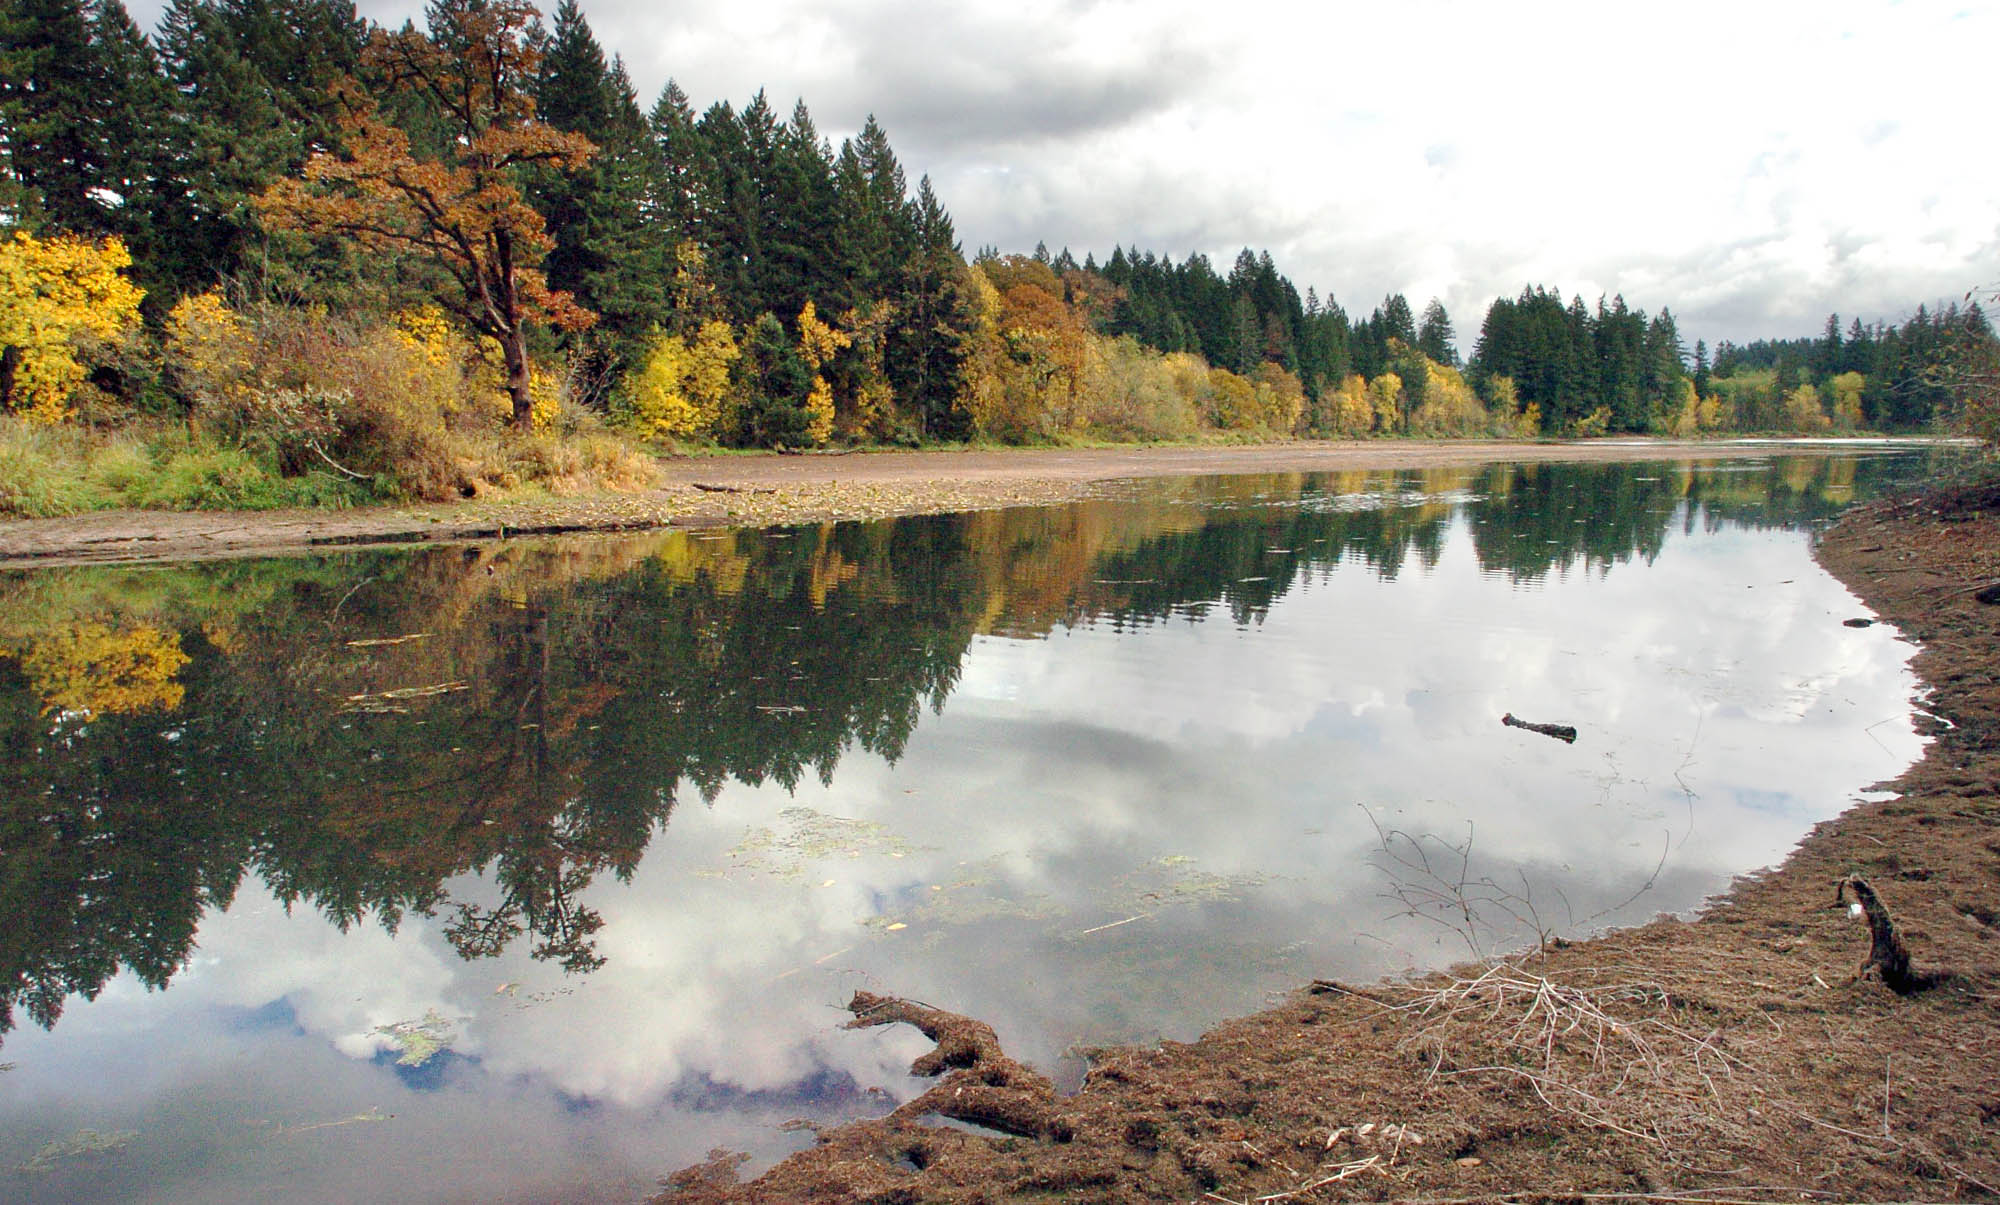 Lacamas Lake is set in a forested area, seen here in October 2006.